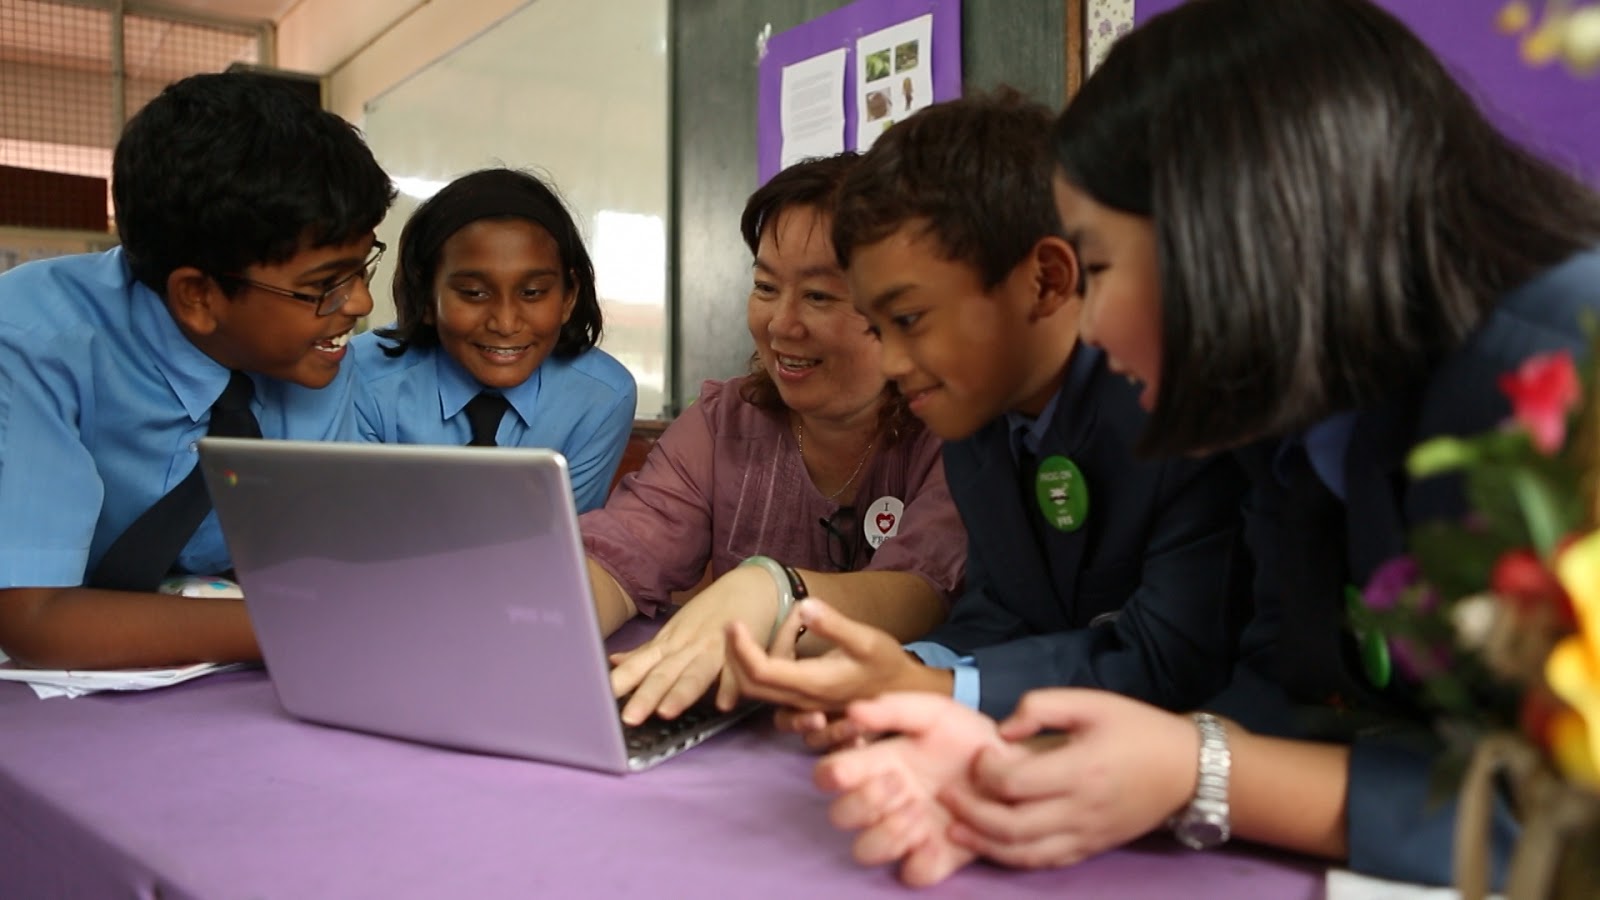 Official Google Blog: For Malaysia: Bringing Google Apps and Chromebooks to the classroom